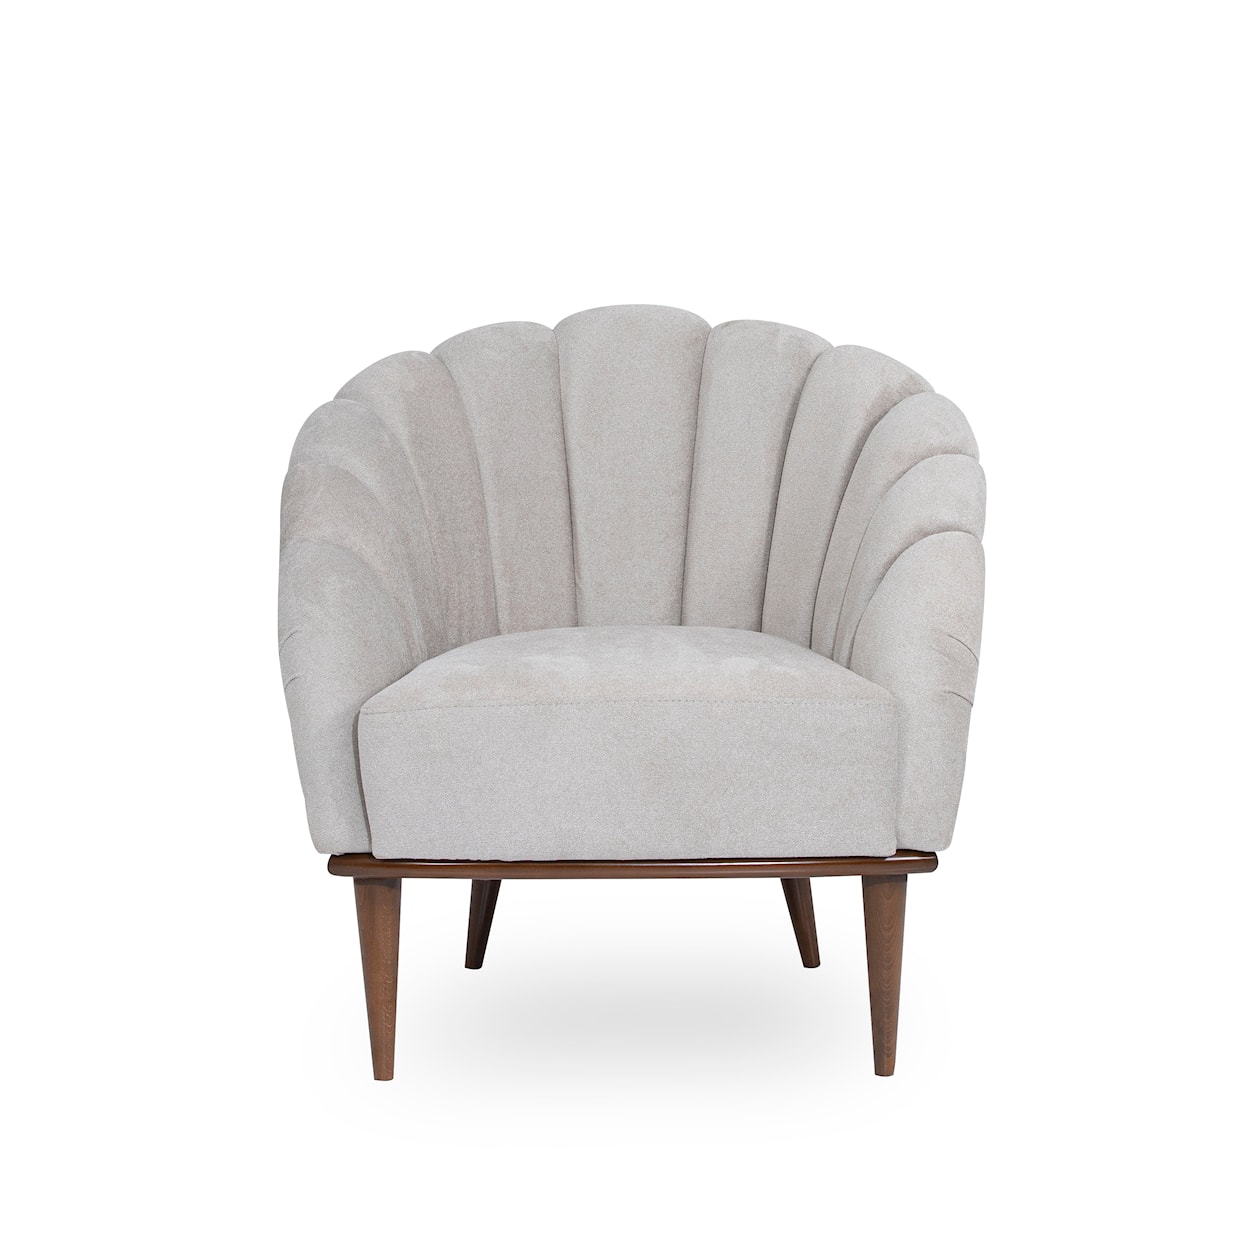 Michael Amini Balboa Upholstered Accent Chair